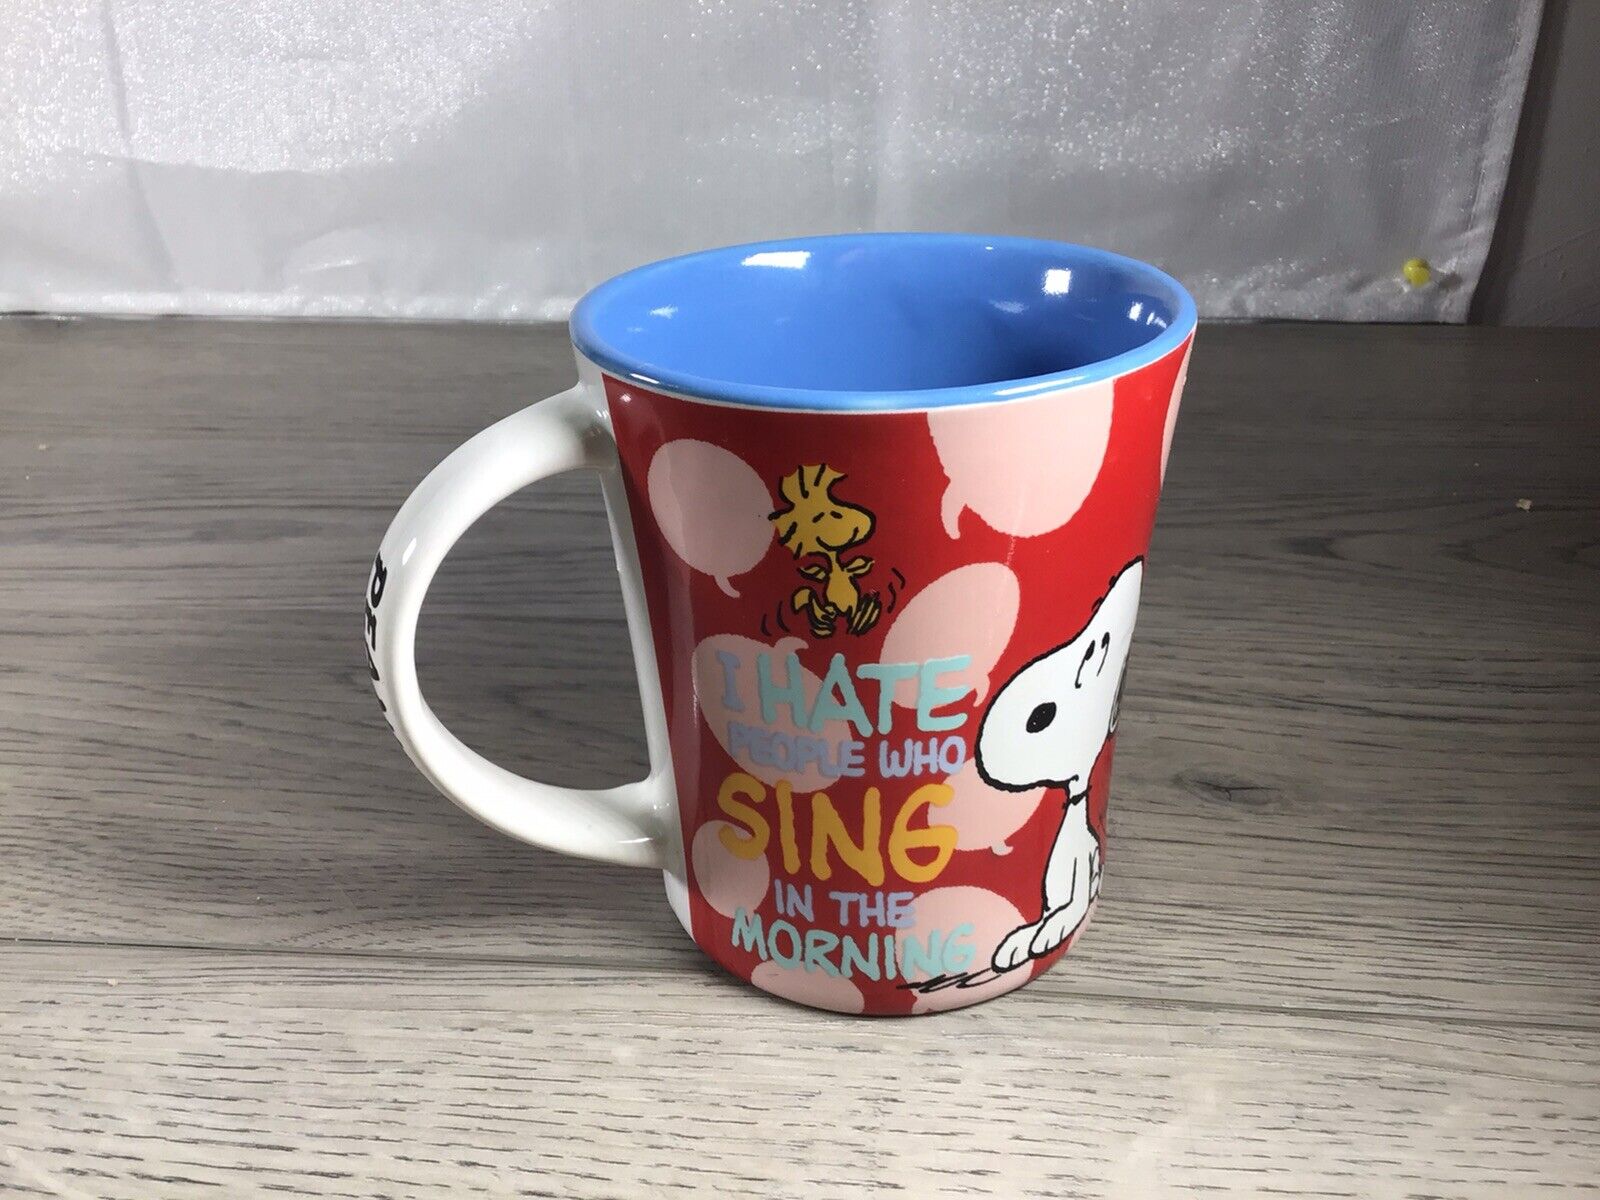 Gibson “ I Hate It When People Sing In The Morning” Peanutes Coffee Mug